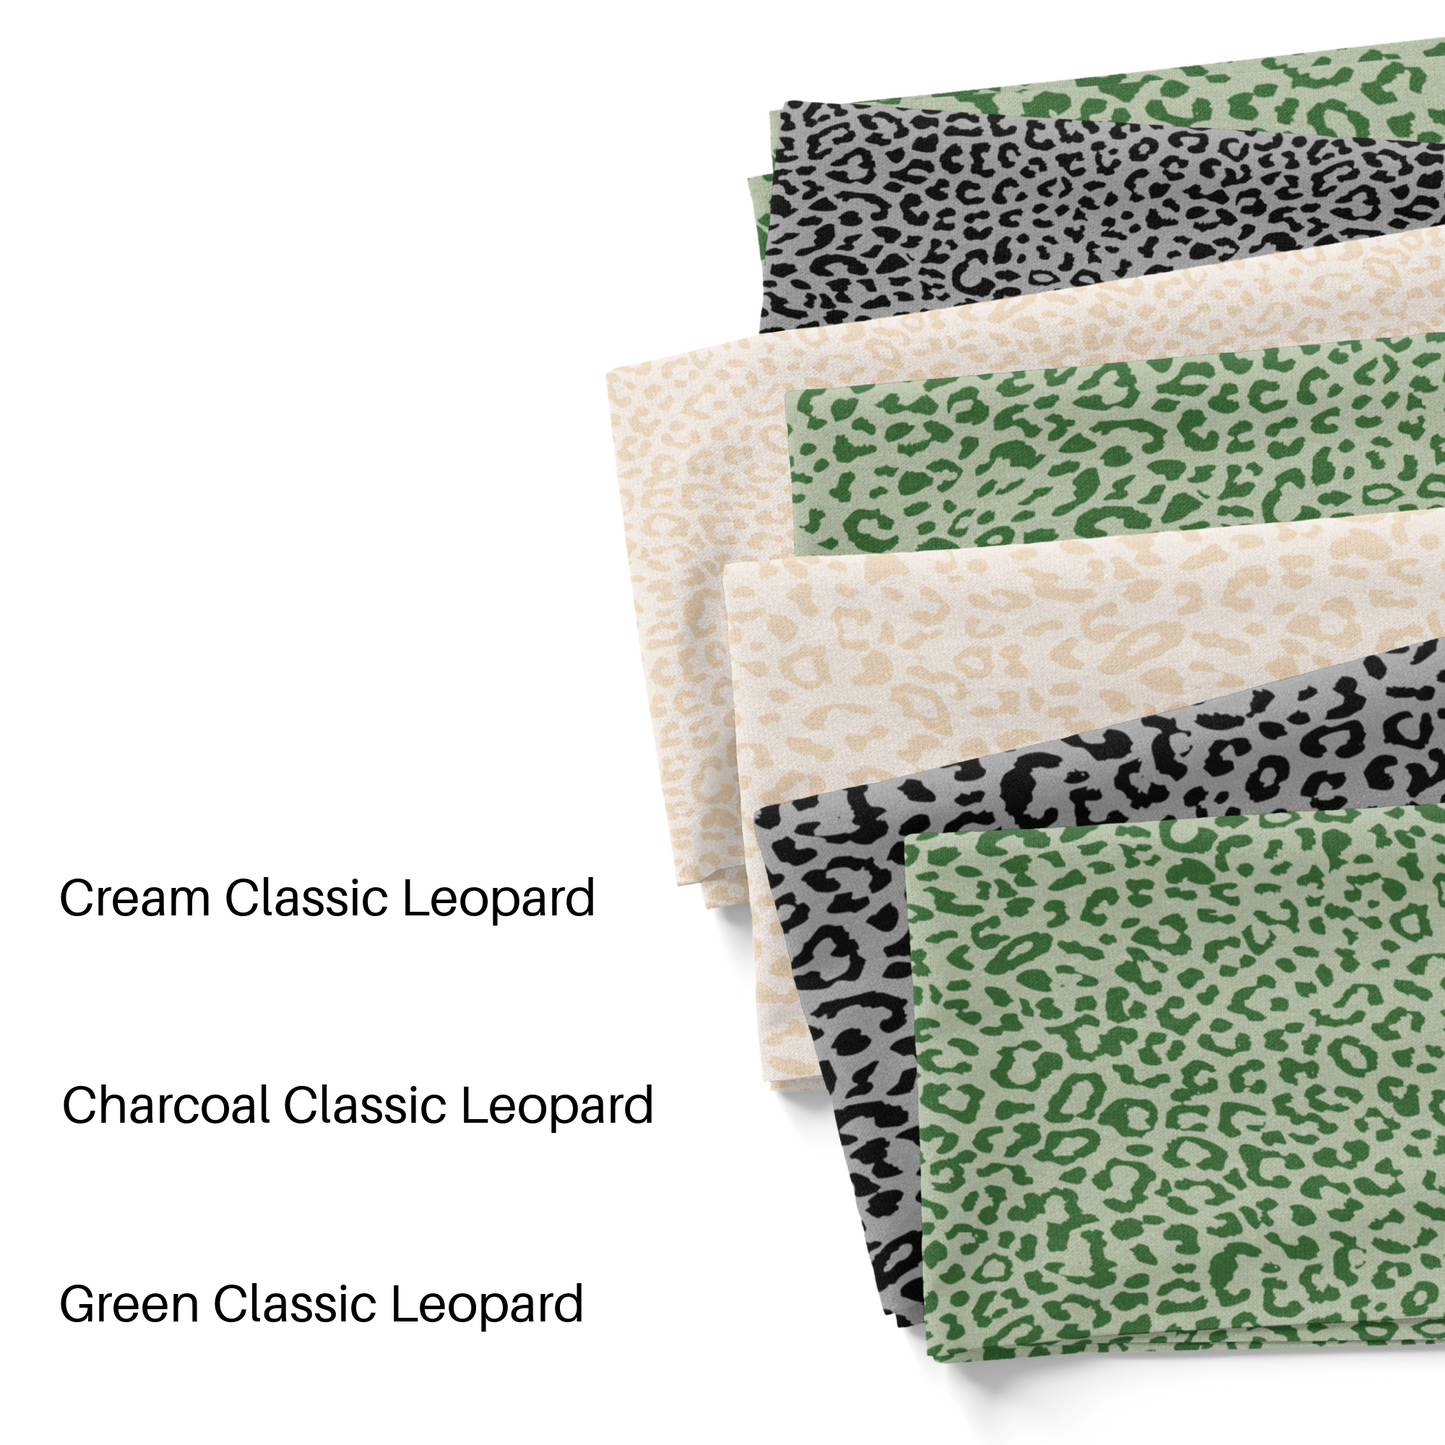 Cream Classic Leopard Fabric By The Yard